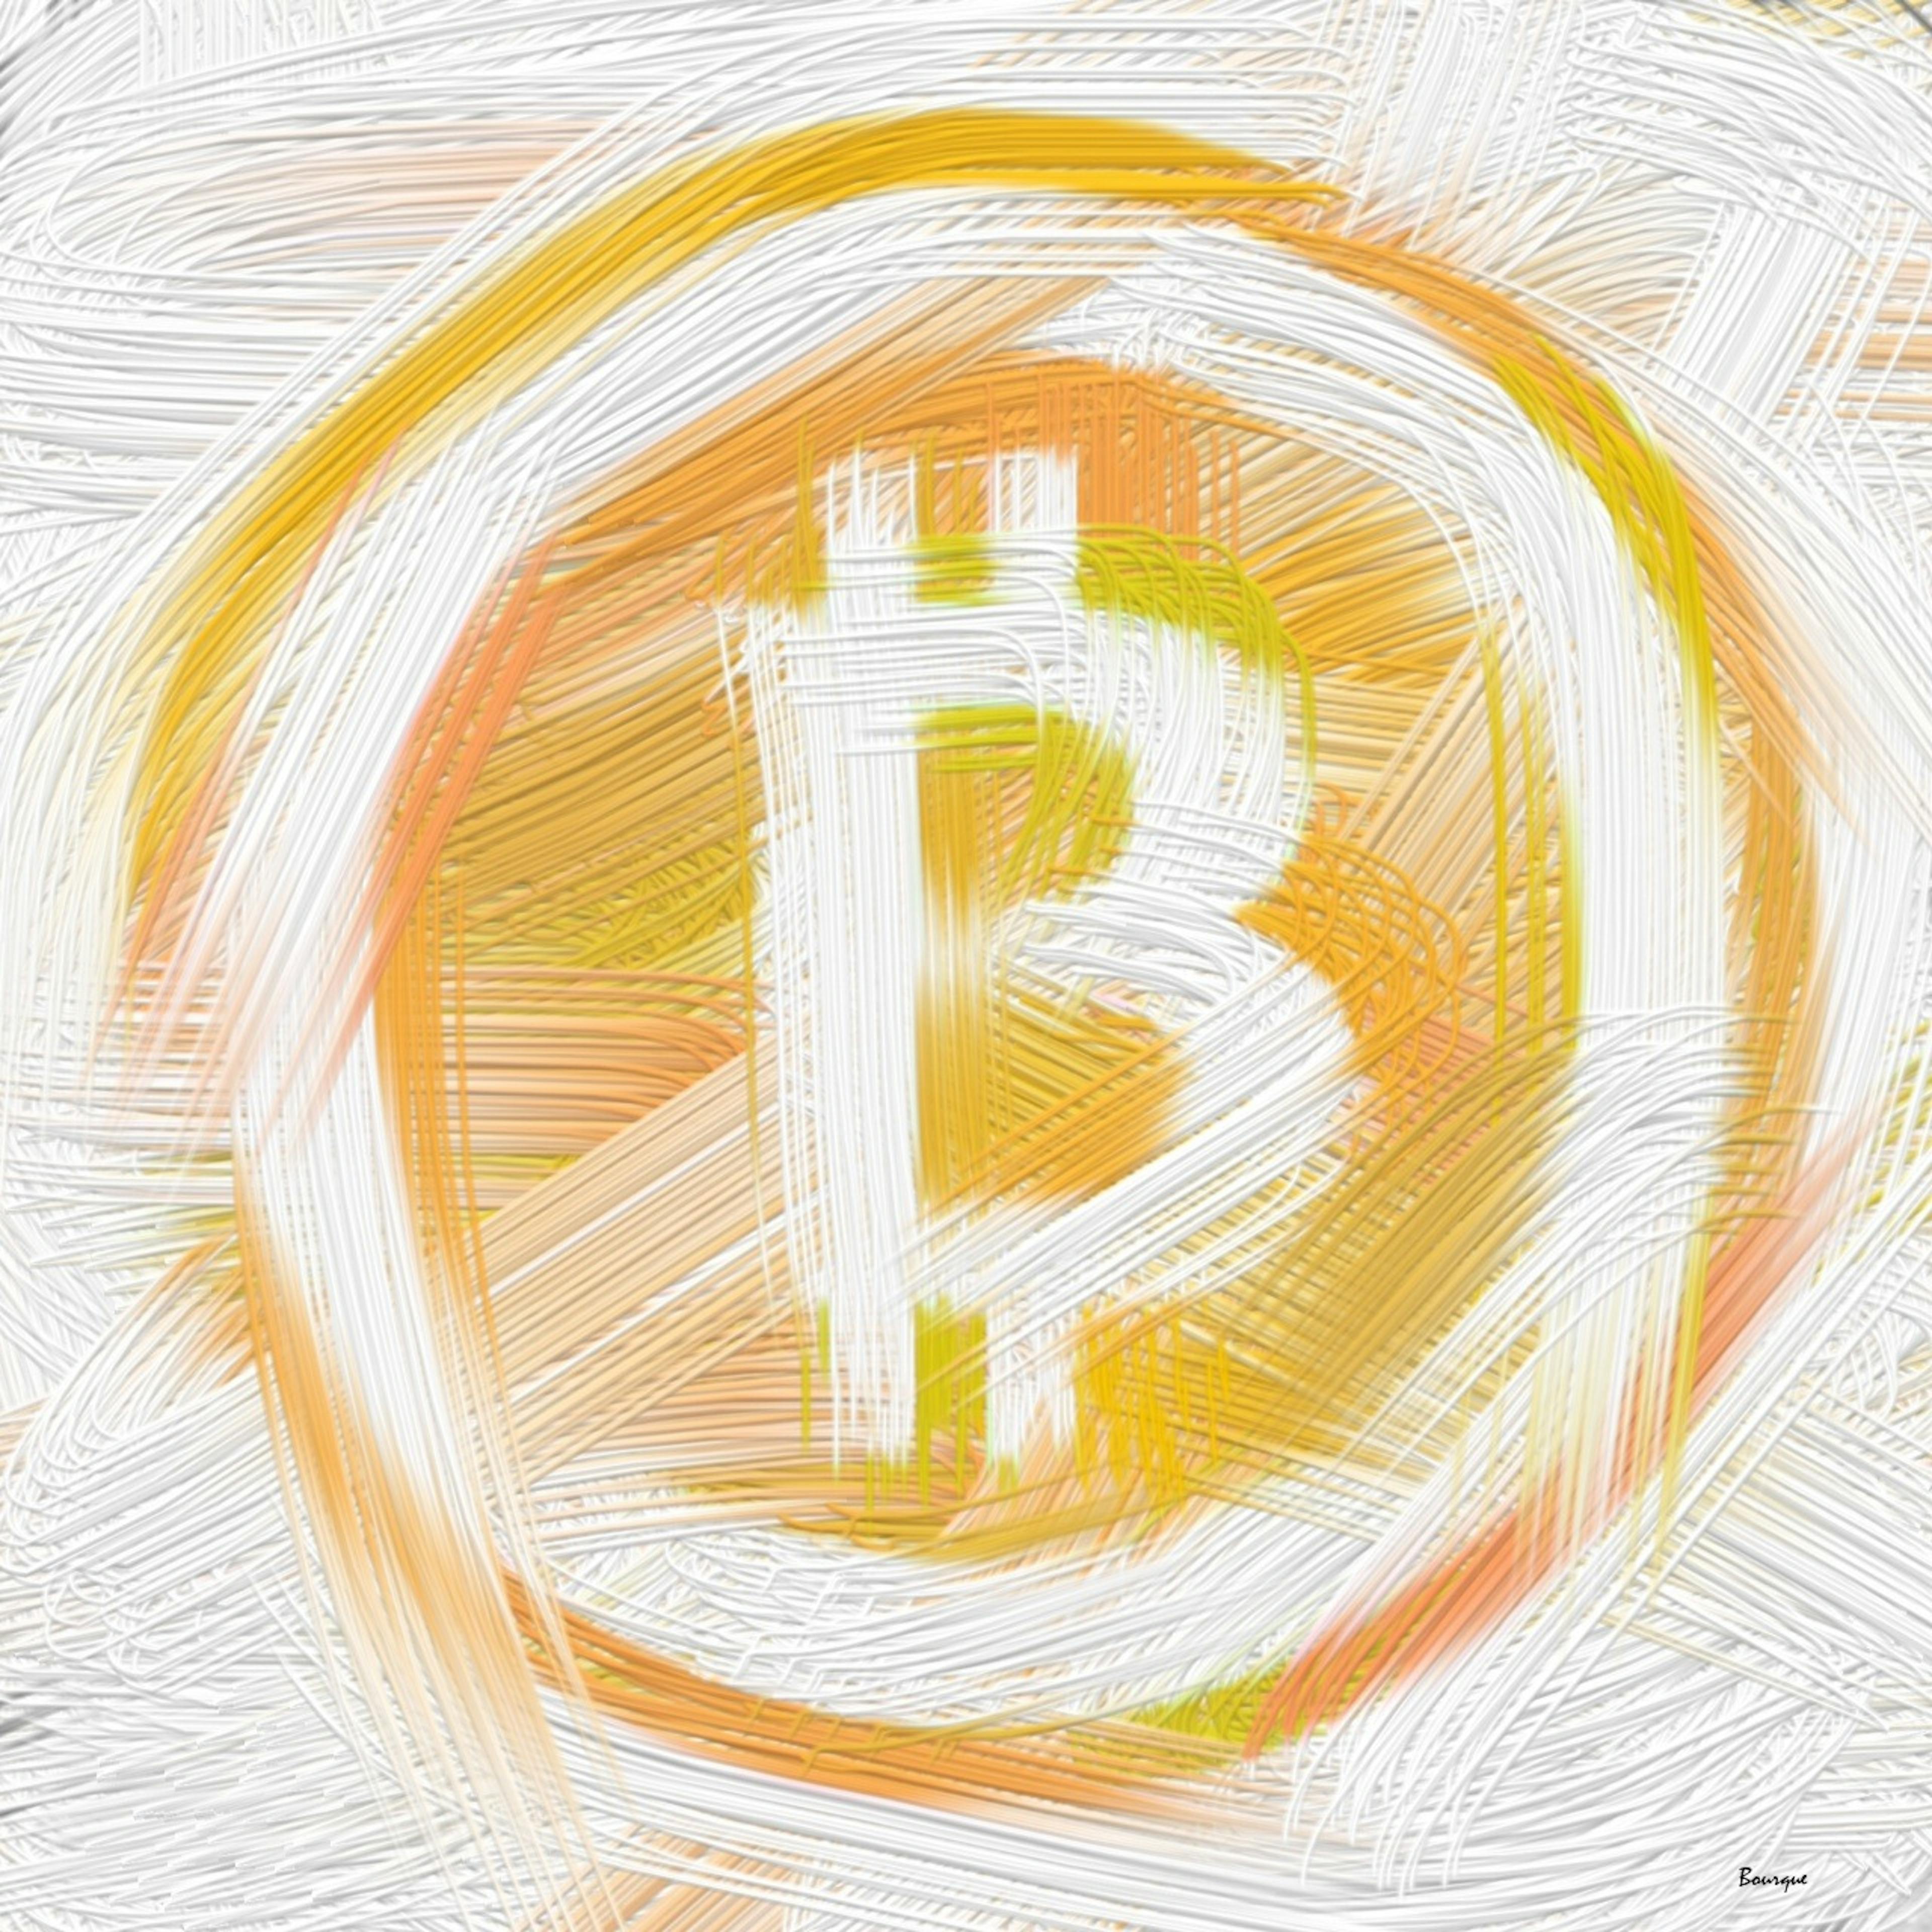 Art of Bitcoin by Pierre Bourque